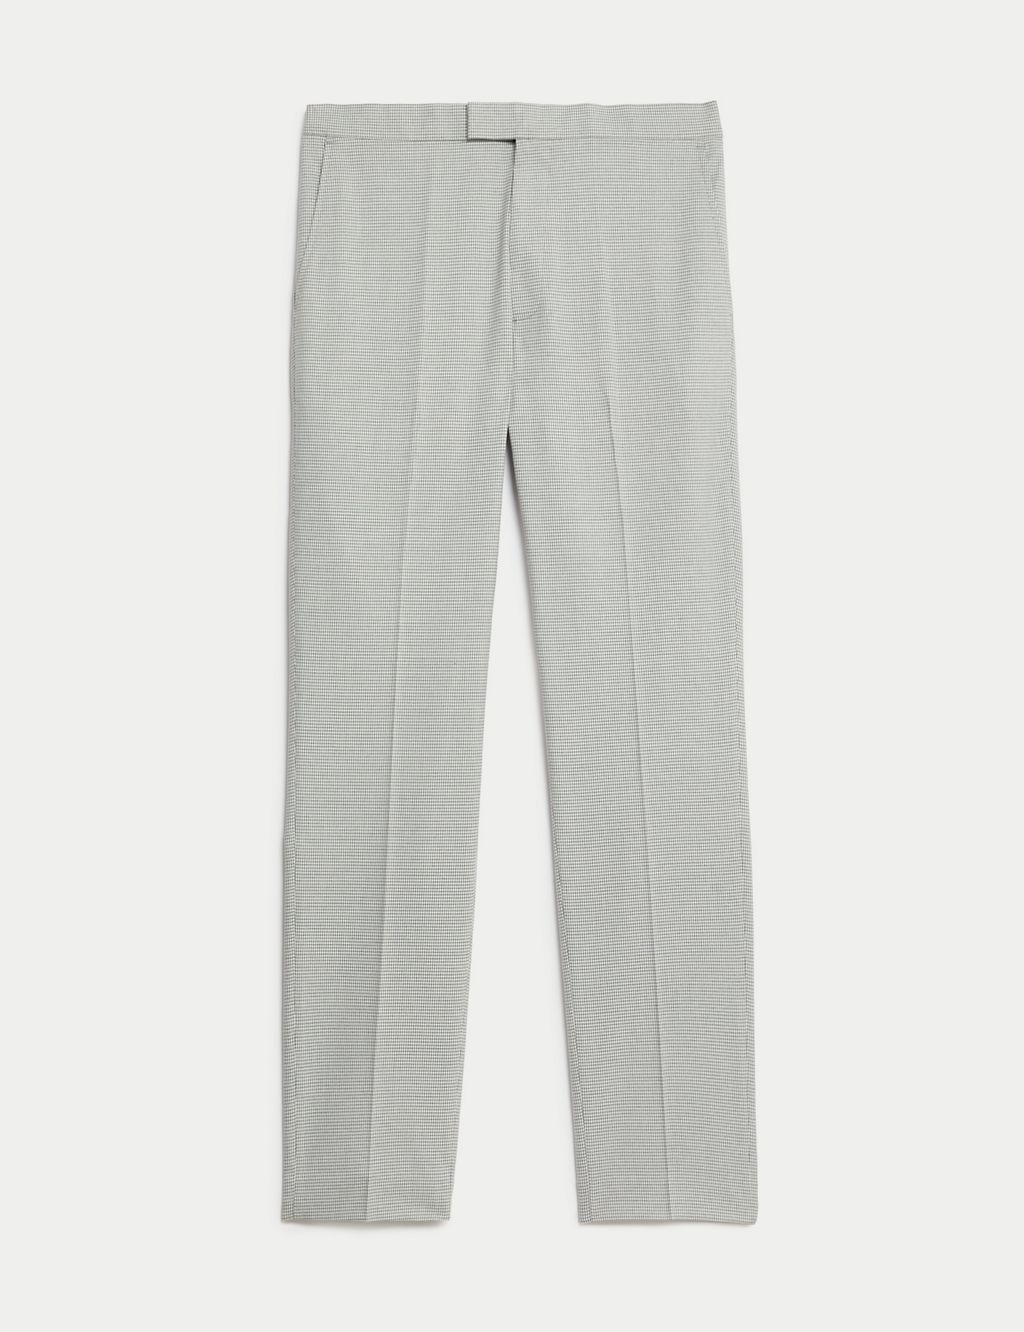 Puppytooth Elasticated Stretch Suit Trousers 5 of 7